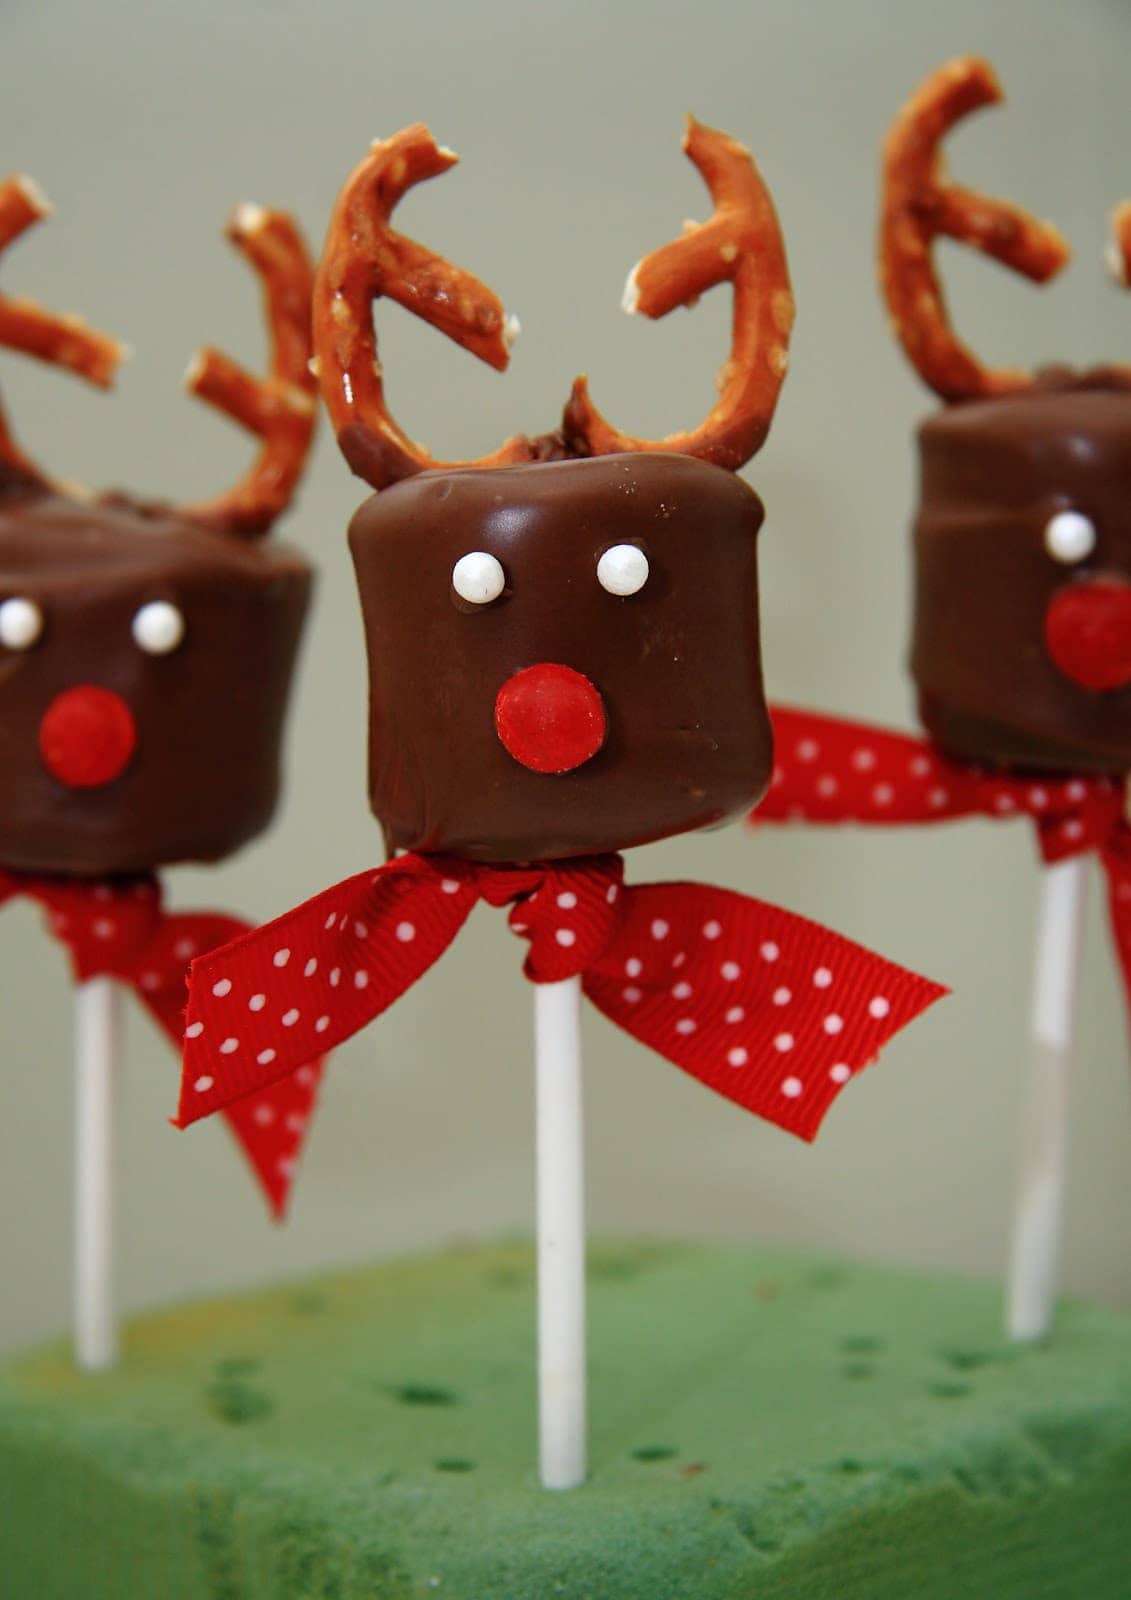 Several Chocolate Covered Marshmallow Reindeers